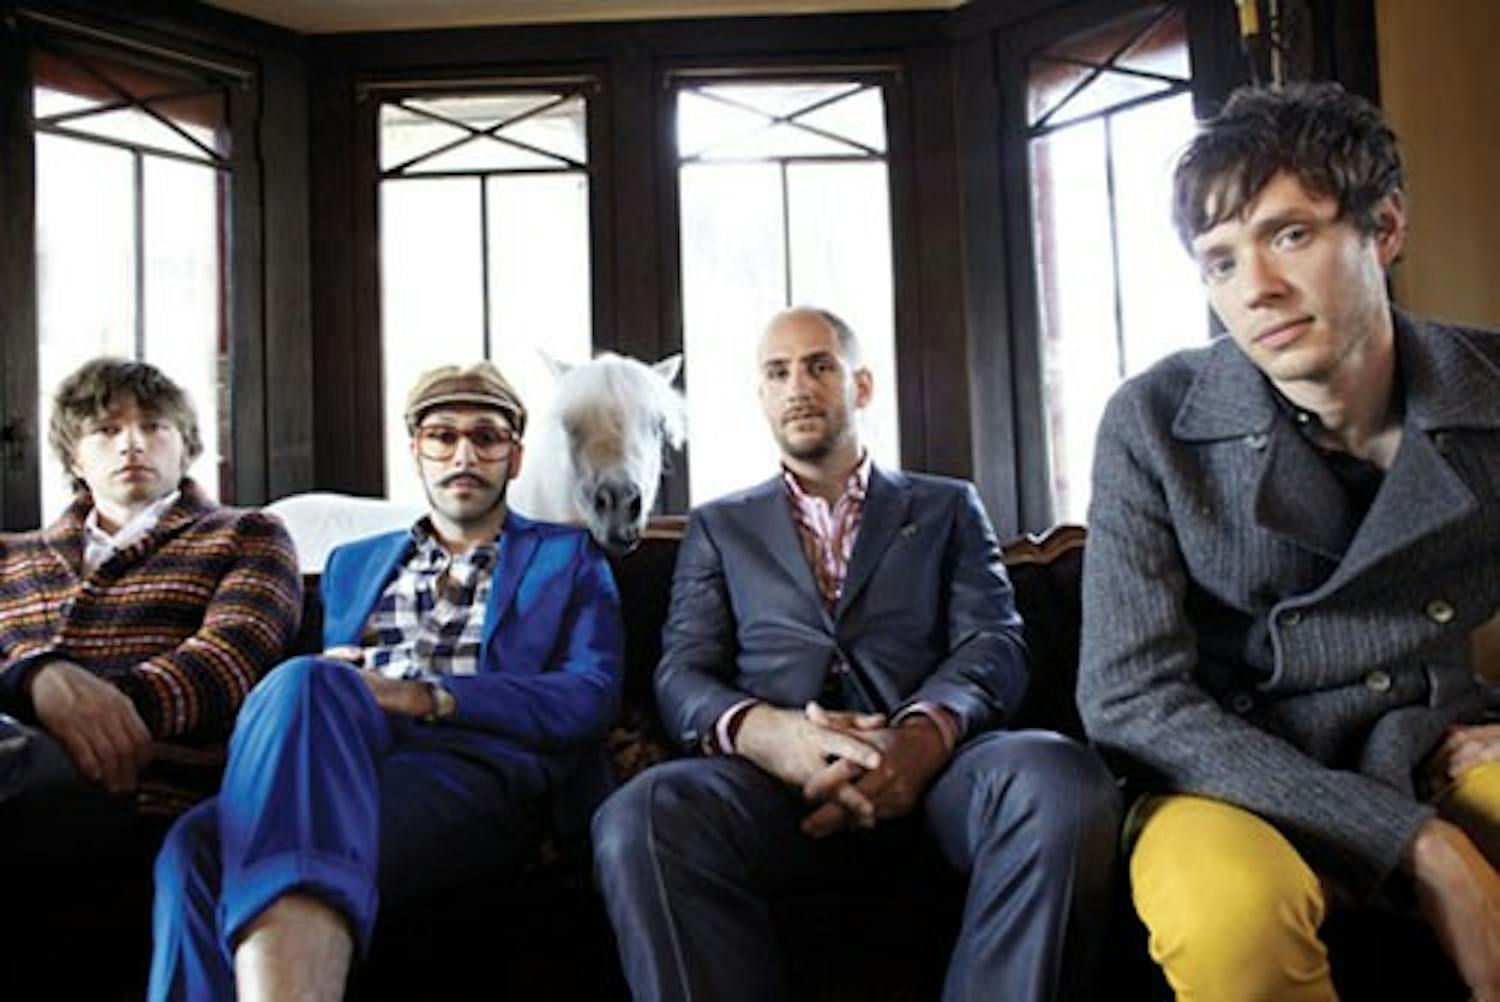 Known best for their 2006 single and viral music video "Here It Goes Again," alternative rock group OK Go, returns with another elaborate performance in the new video "End Love." From Left: Andy Ross, Tim Nordwind, Dan Konopka, Damian Kulash. (Photo courtesy of Day 19)
